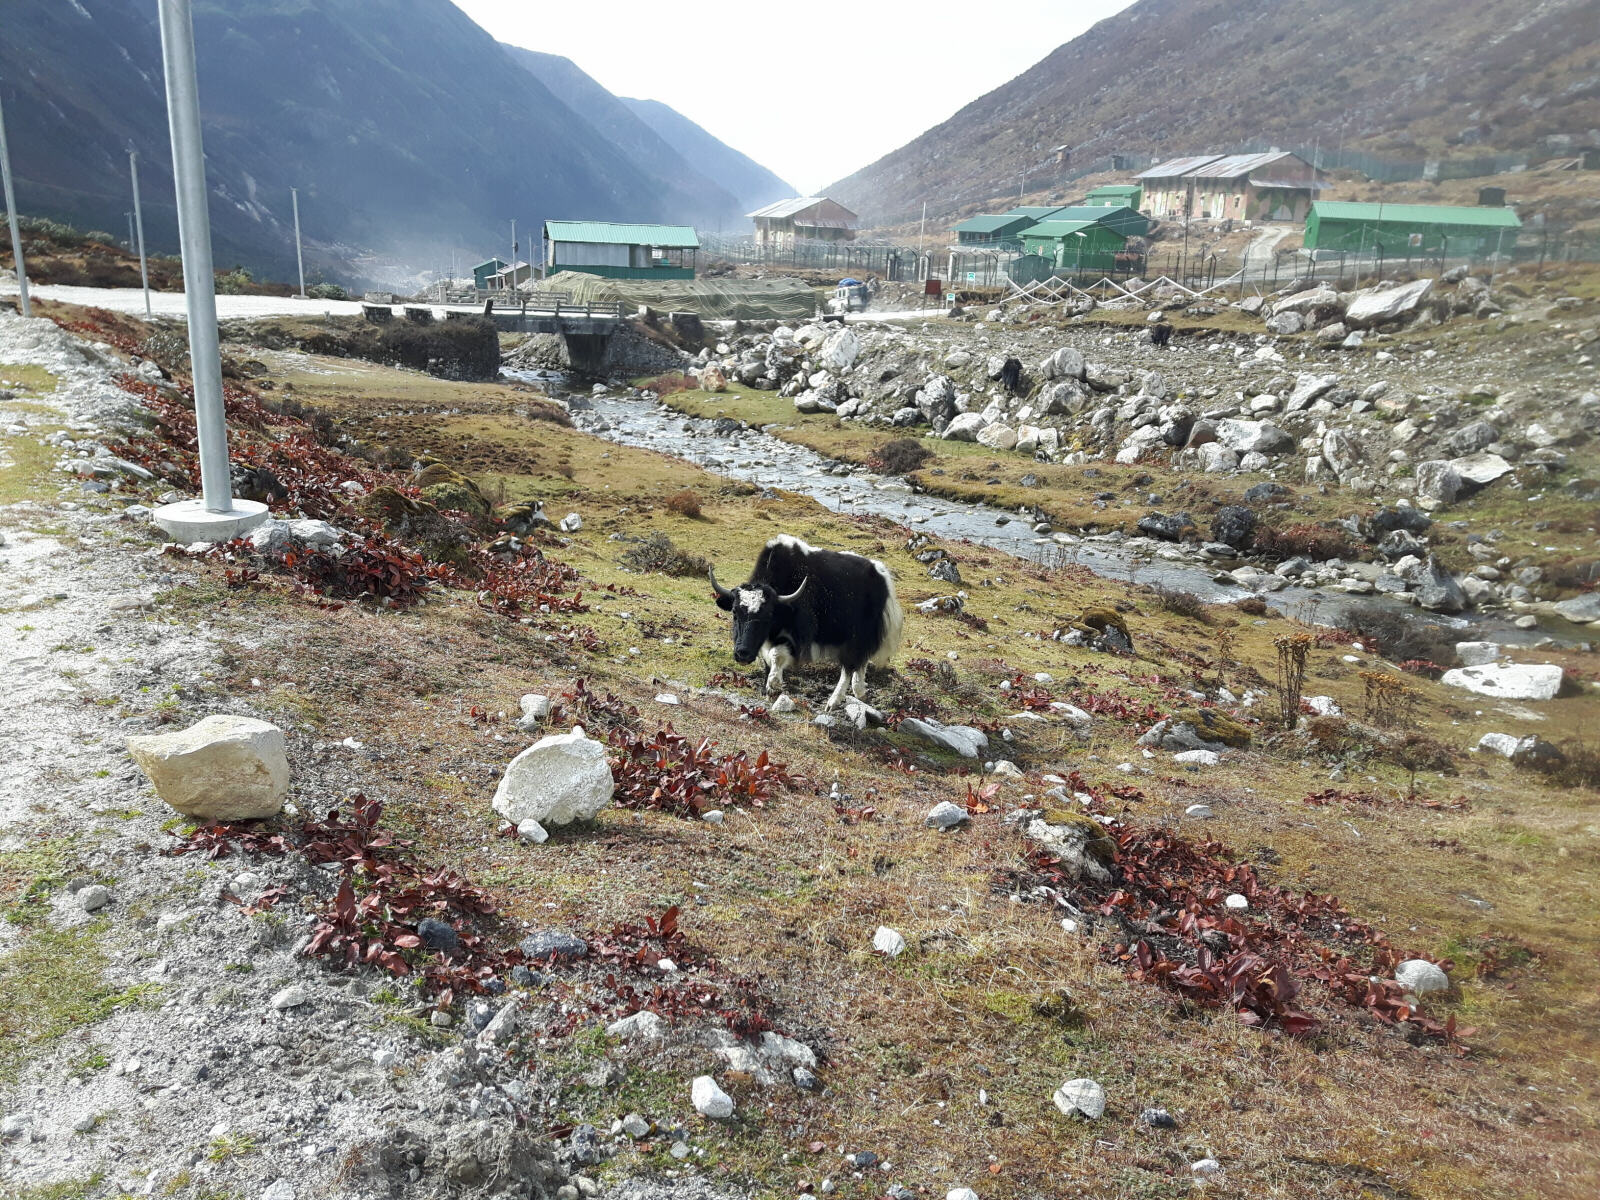 A yak in the mountains on the road to Tawang, Arunachal Pradesh